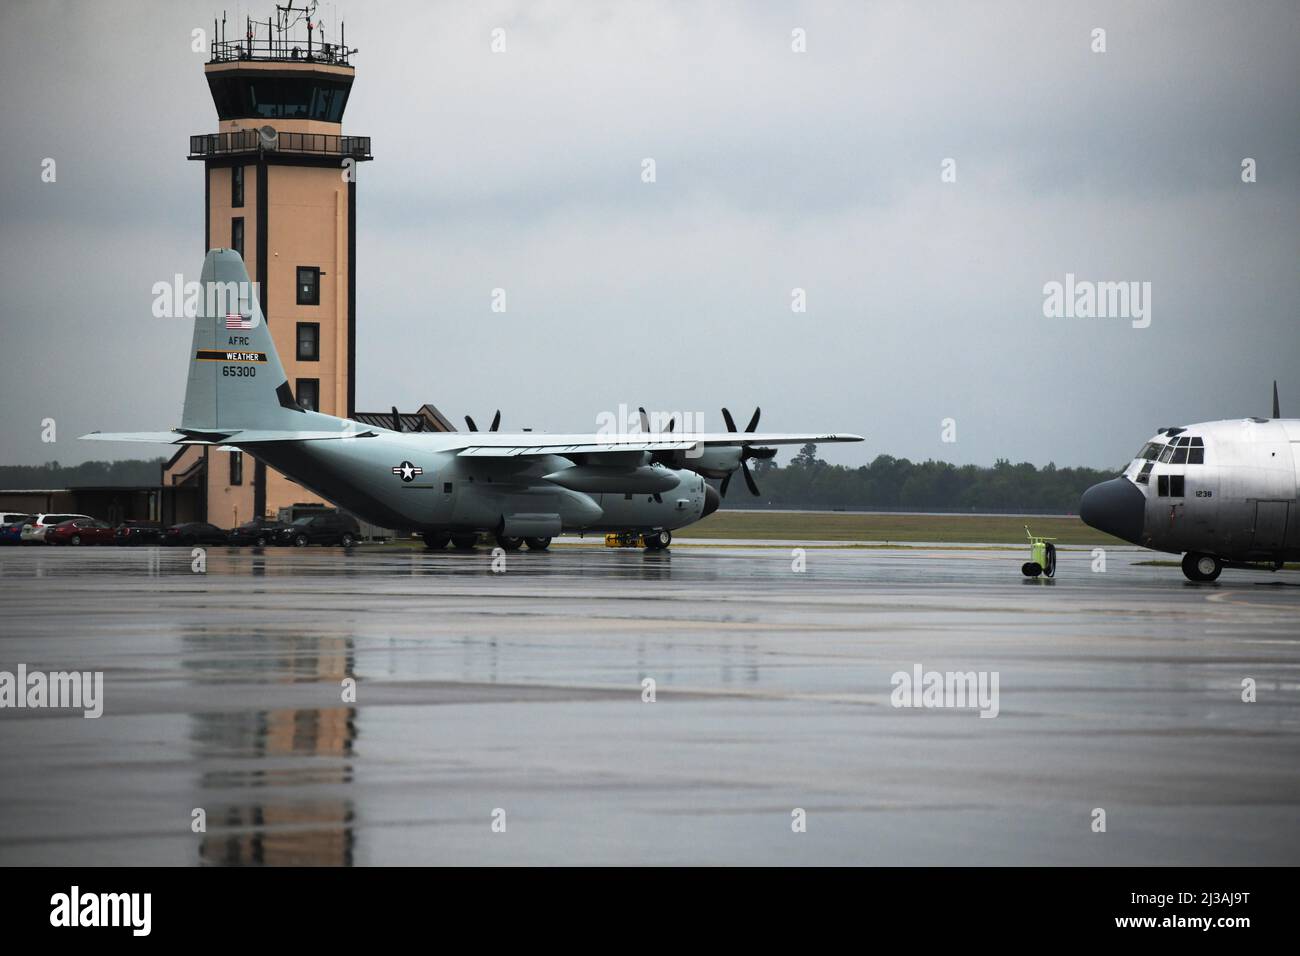 https://c8.alamy.com/comp/2J3AJ9T/robins-air-force-base-ga-the-wc-130j-aircraft-from-keesler-air-force-base-mississippi-passes-by-the-air-traffic-control-tower-at-robins-air-force-base-georgia-april-5-2022-the-weather-aircraft-received-depot-level-maintenance-at-the-warner-robins-air-logistics-complex-and-now-dons-a-glossy-gray-paint-scheme-which-is-a-throwback-to-the-original-look-of-the-weather-aircraft-prior-to-2008-us-air-force-photo-by-kisha-foster-johnson-2J3AJ9T.jpg